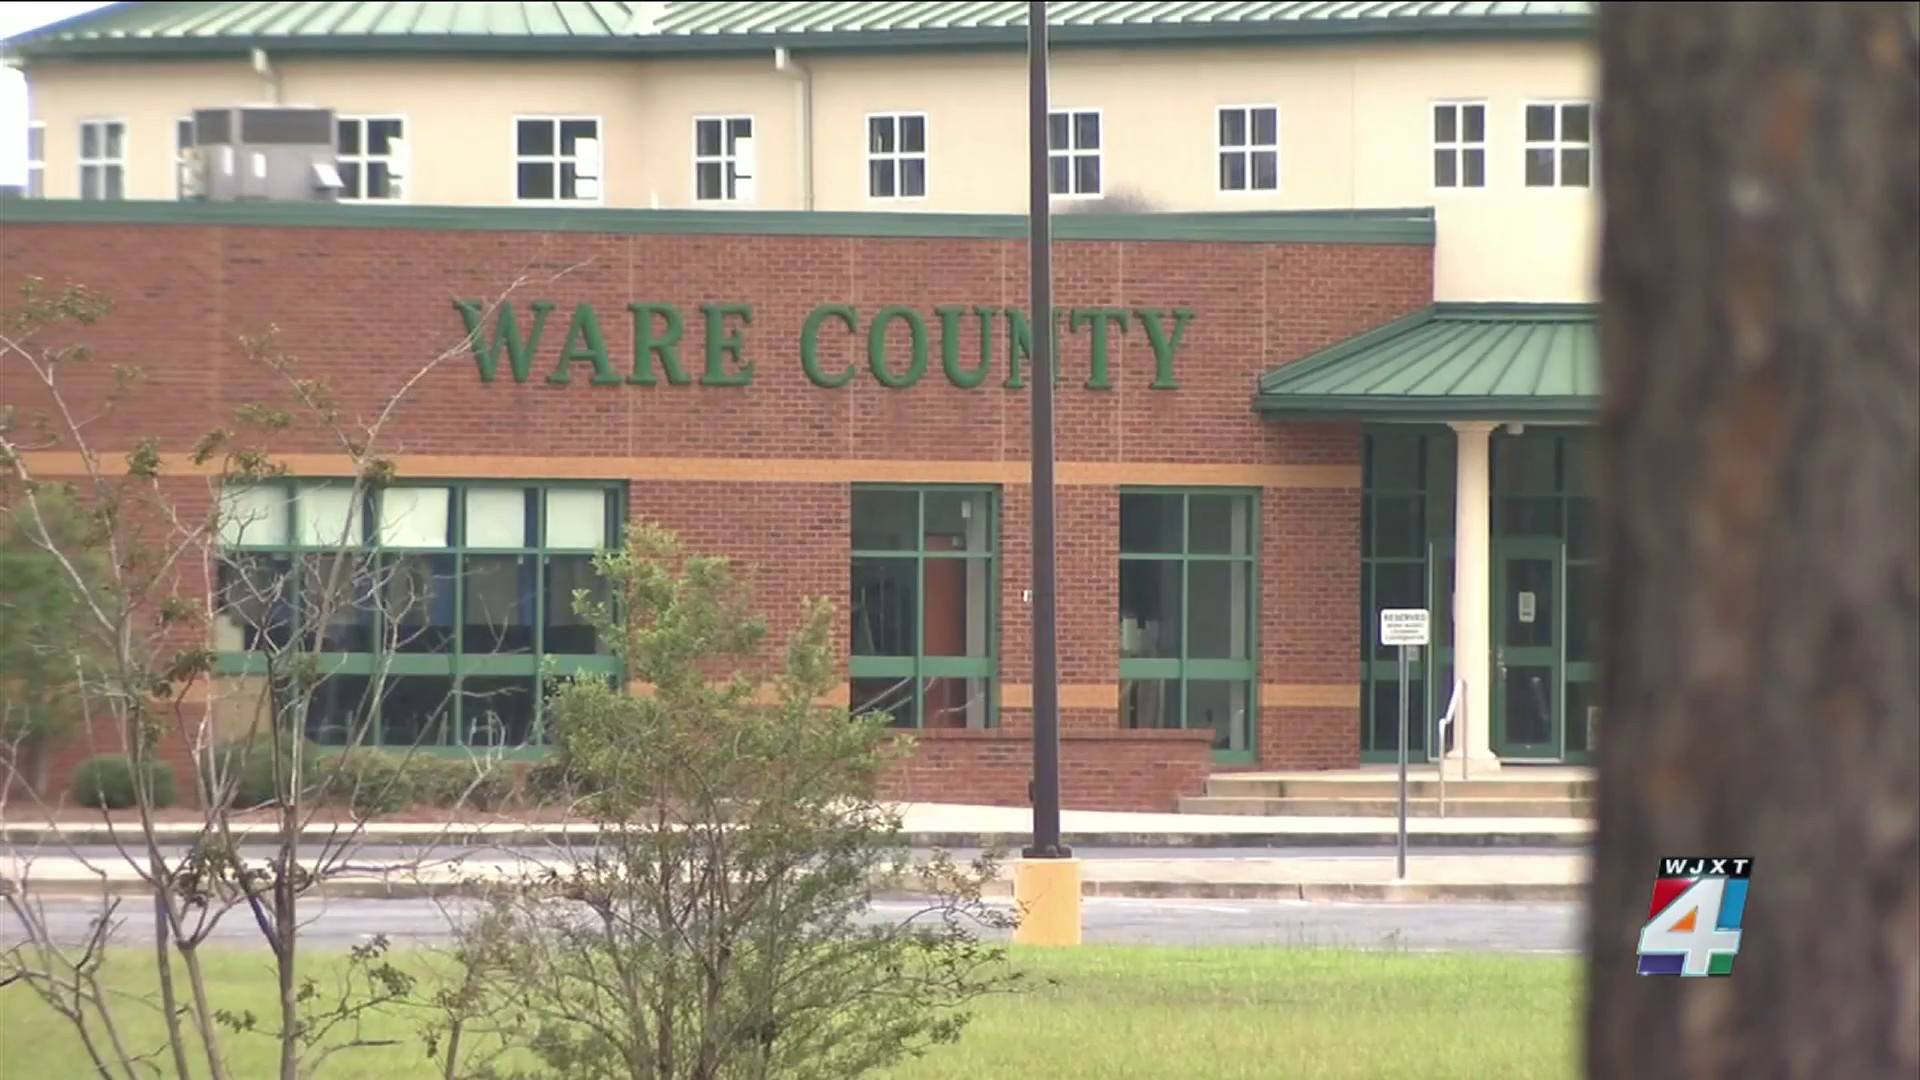 Ware County closes all 11 schools after 'sharp increase' in COVID-19 cases